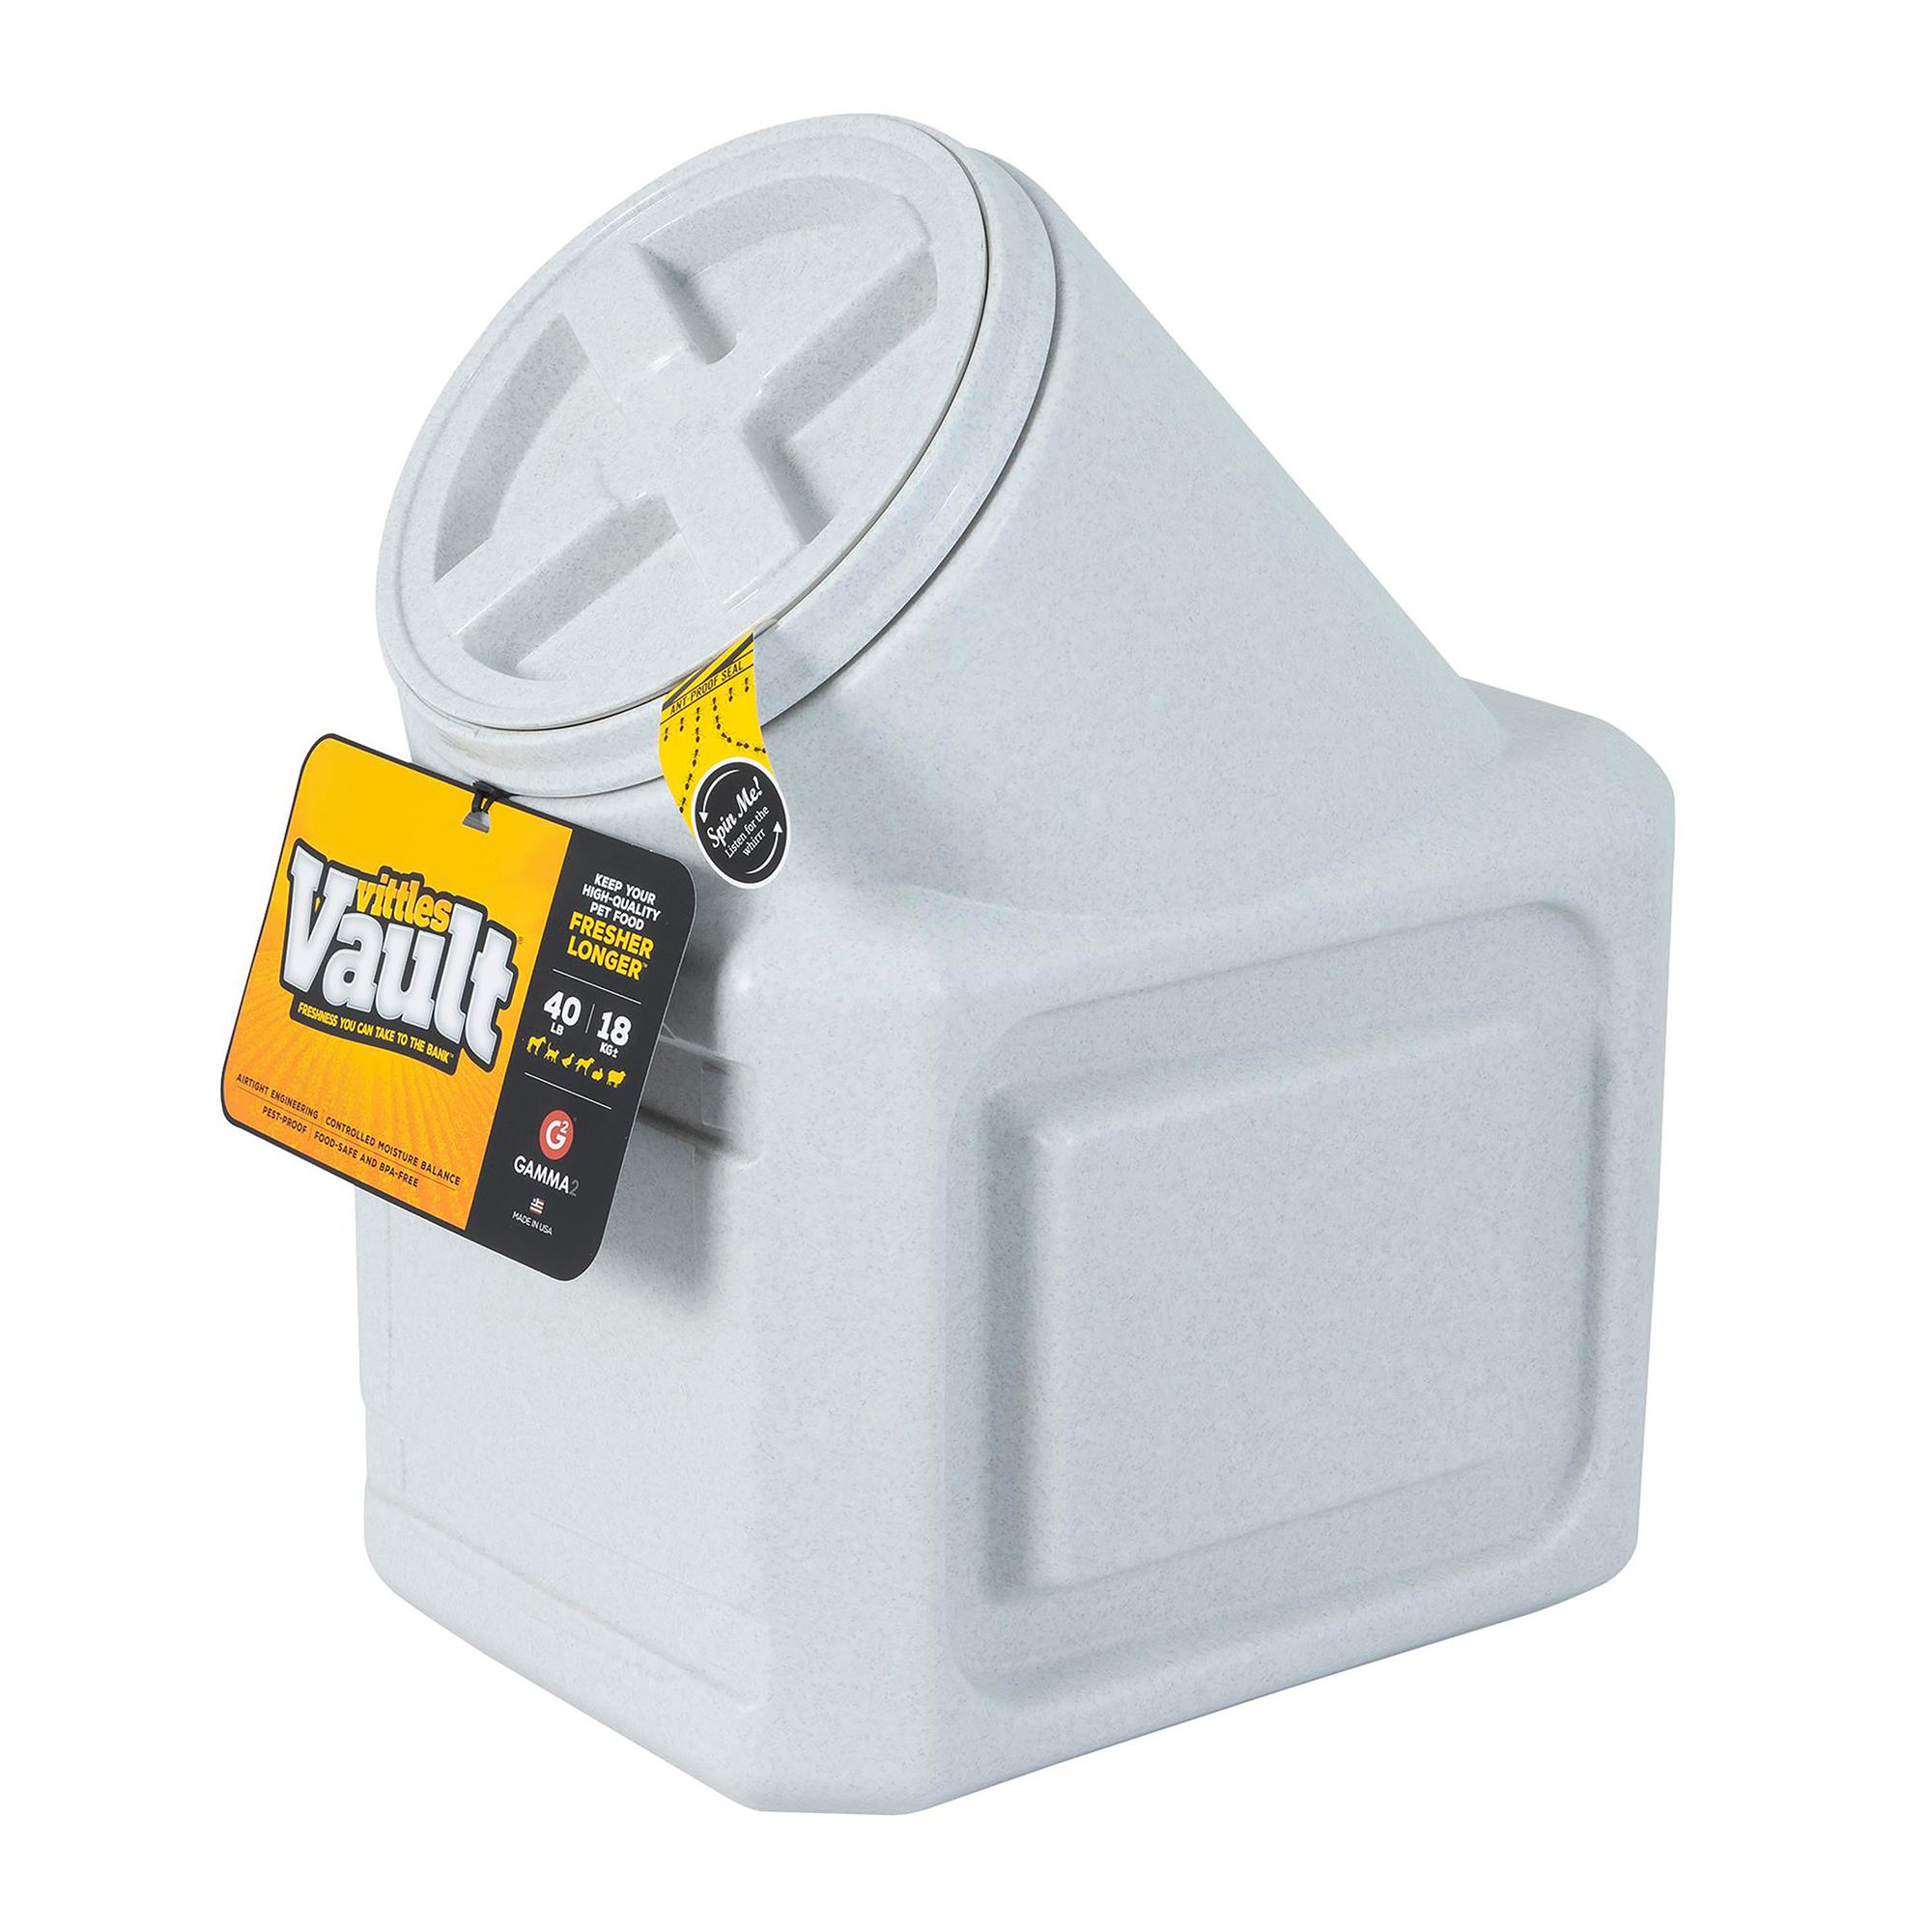 Vittles Vault Outback Stackable Food Storage Container